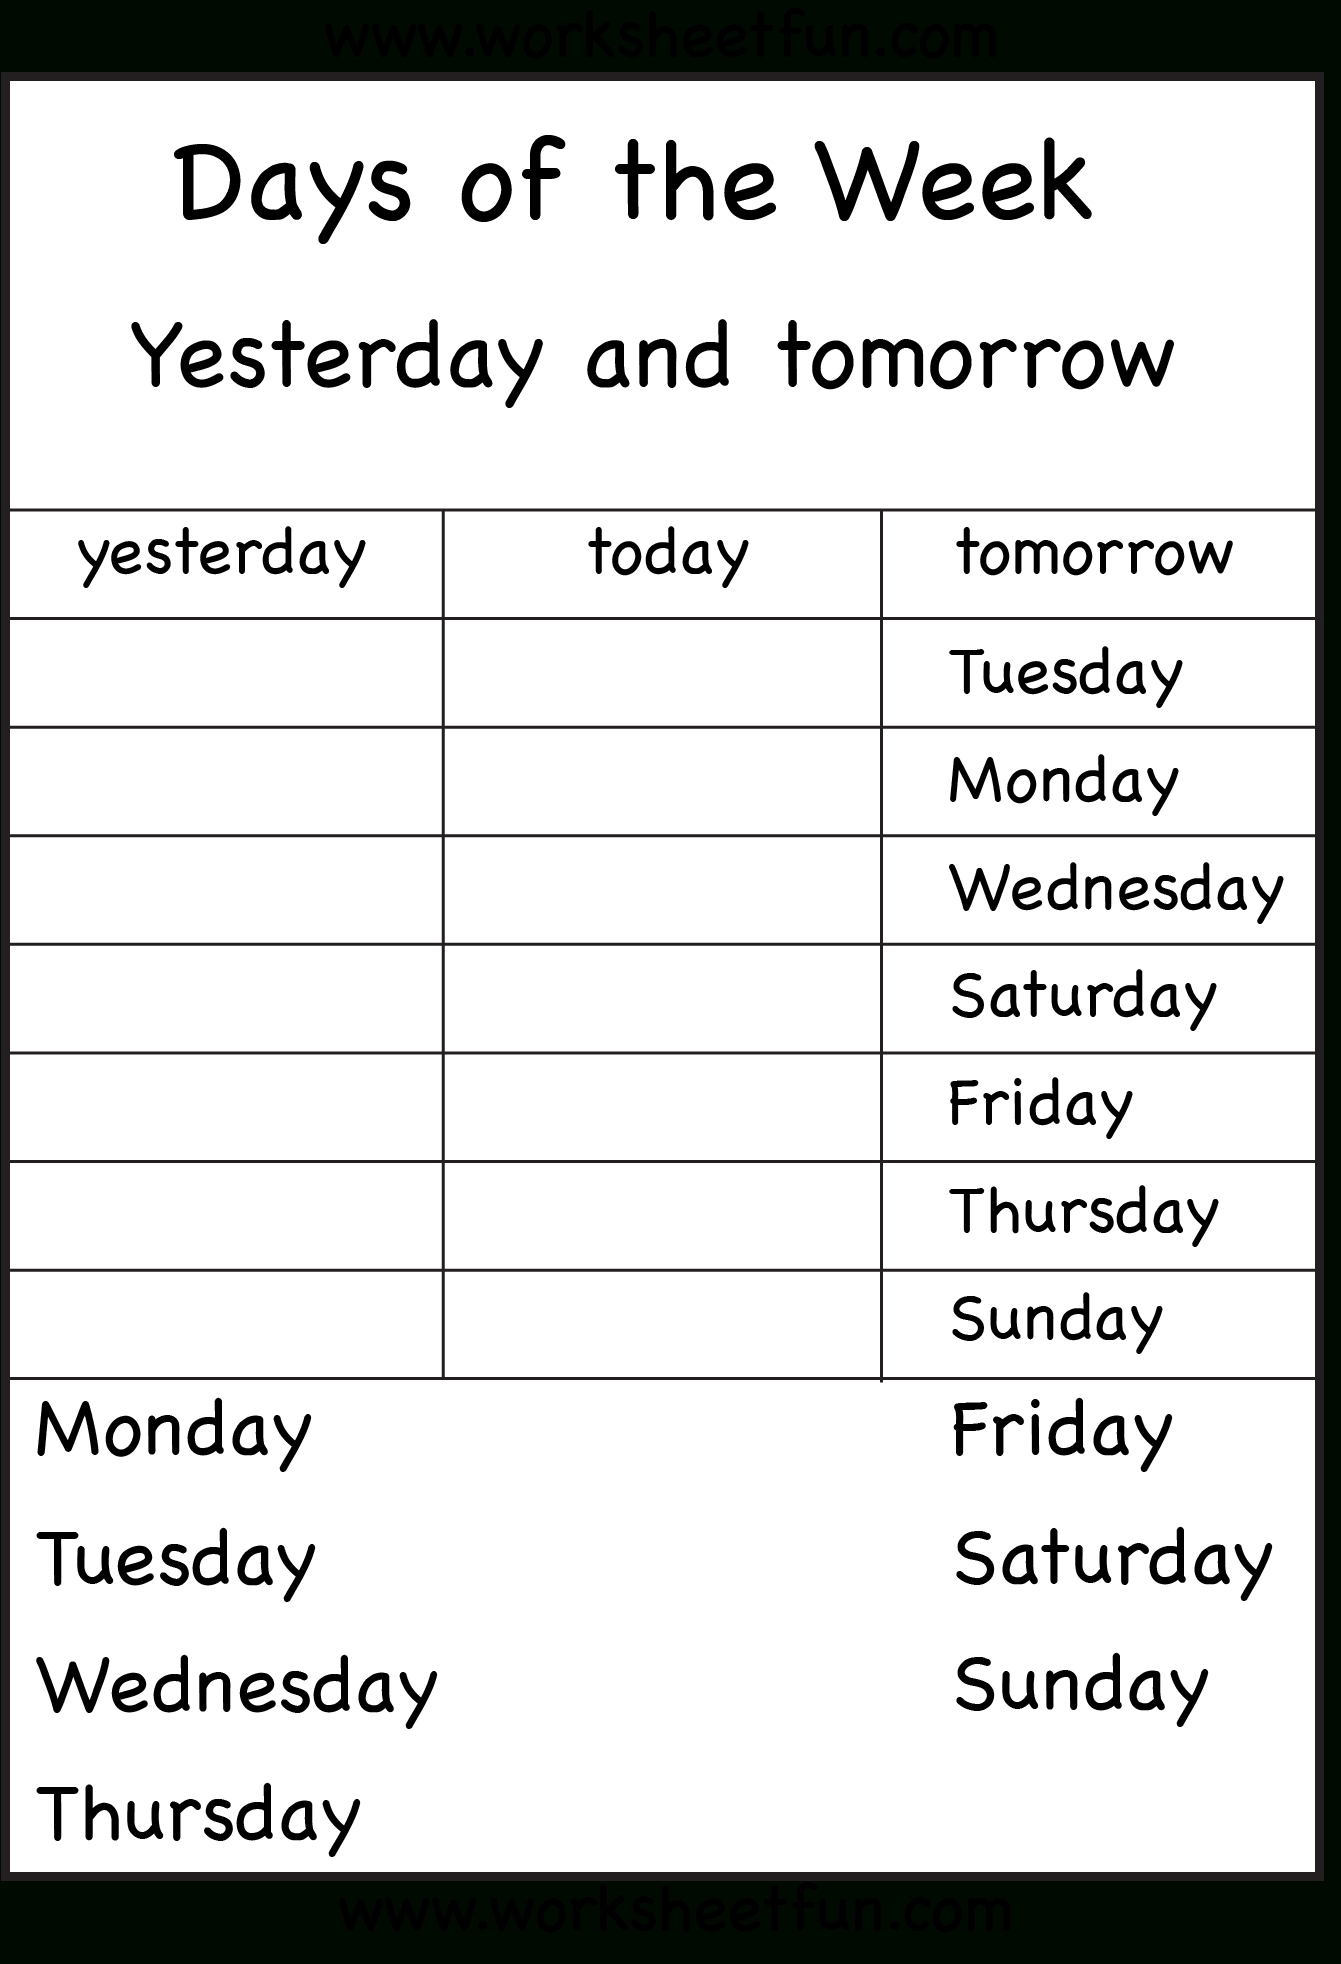 Days Of The Week - Yesterday And Tomorrow - 6 Worksheets